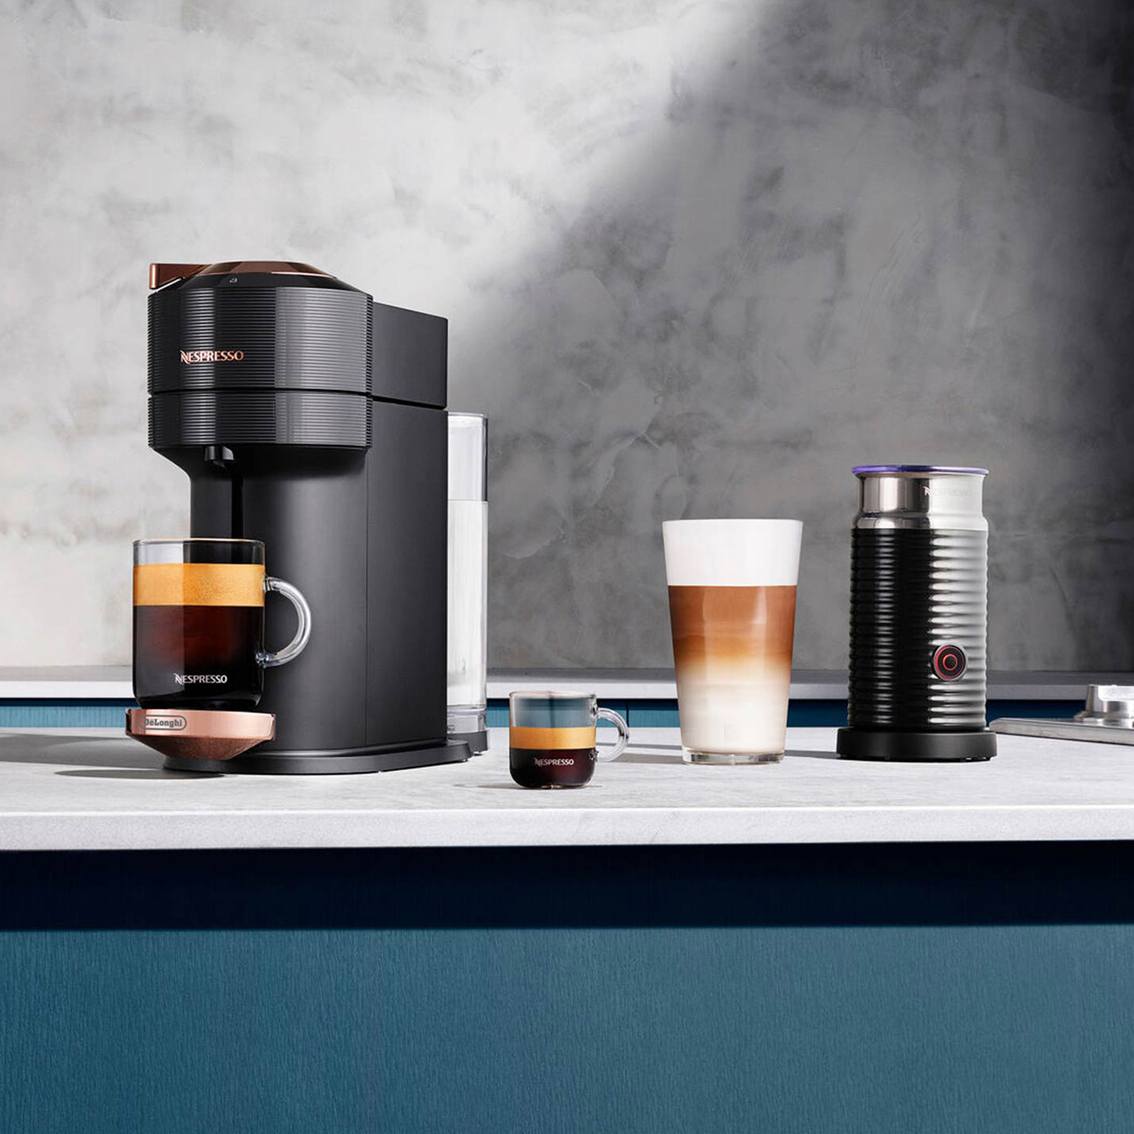 Nespresso by De'Longhi Premium Coffee and Espresso Maker with Milk Frother - Image 6 of 7